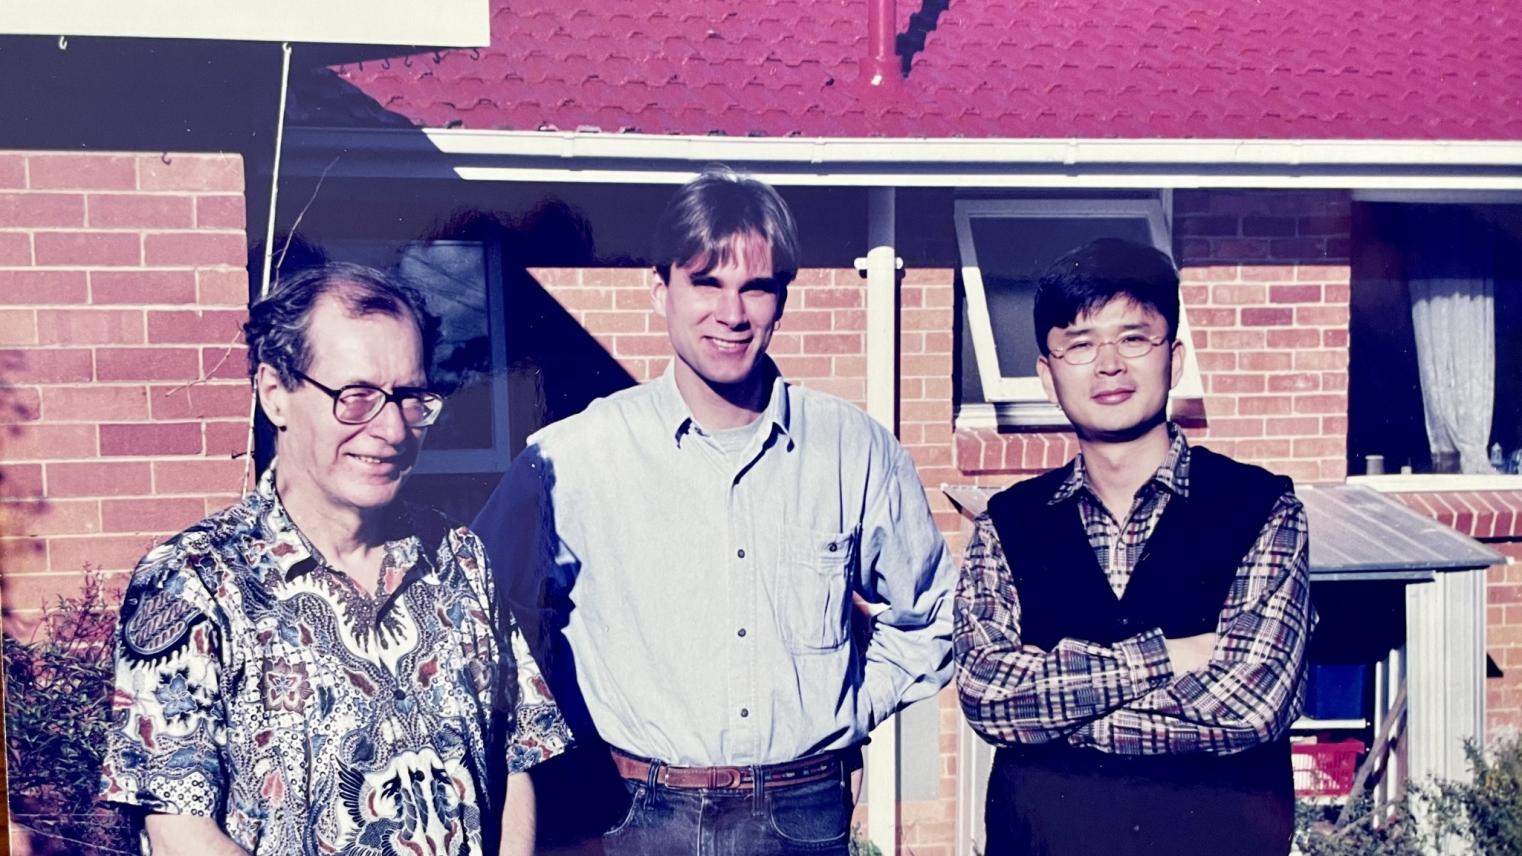 Harold Crouch (left) with PhD students, Marcus Mietzner (now an Indonesia specialist based at ANU) and Inwon Hwang (South Korea's leading Malaysian politics expert), c. 1997.